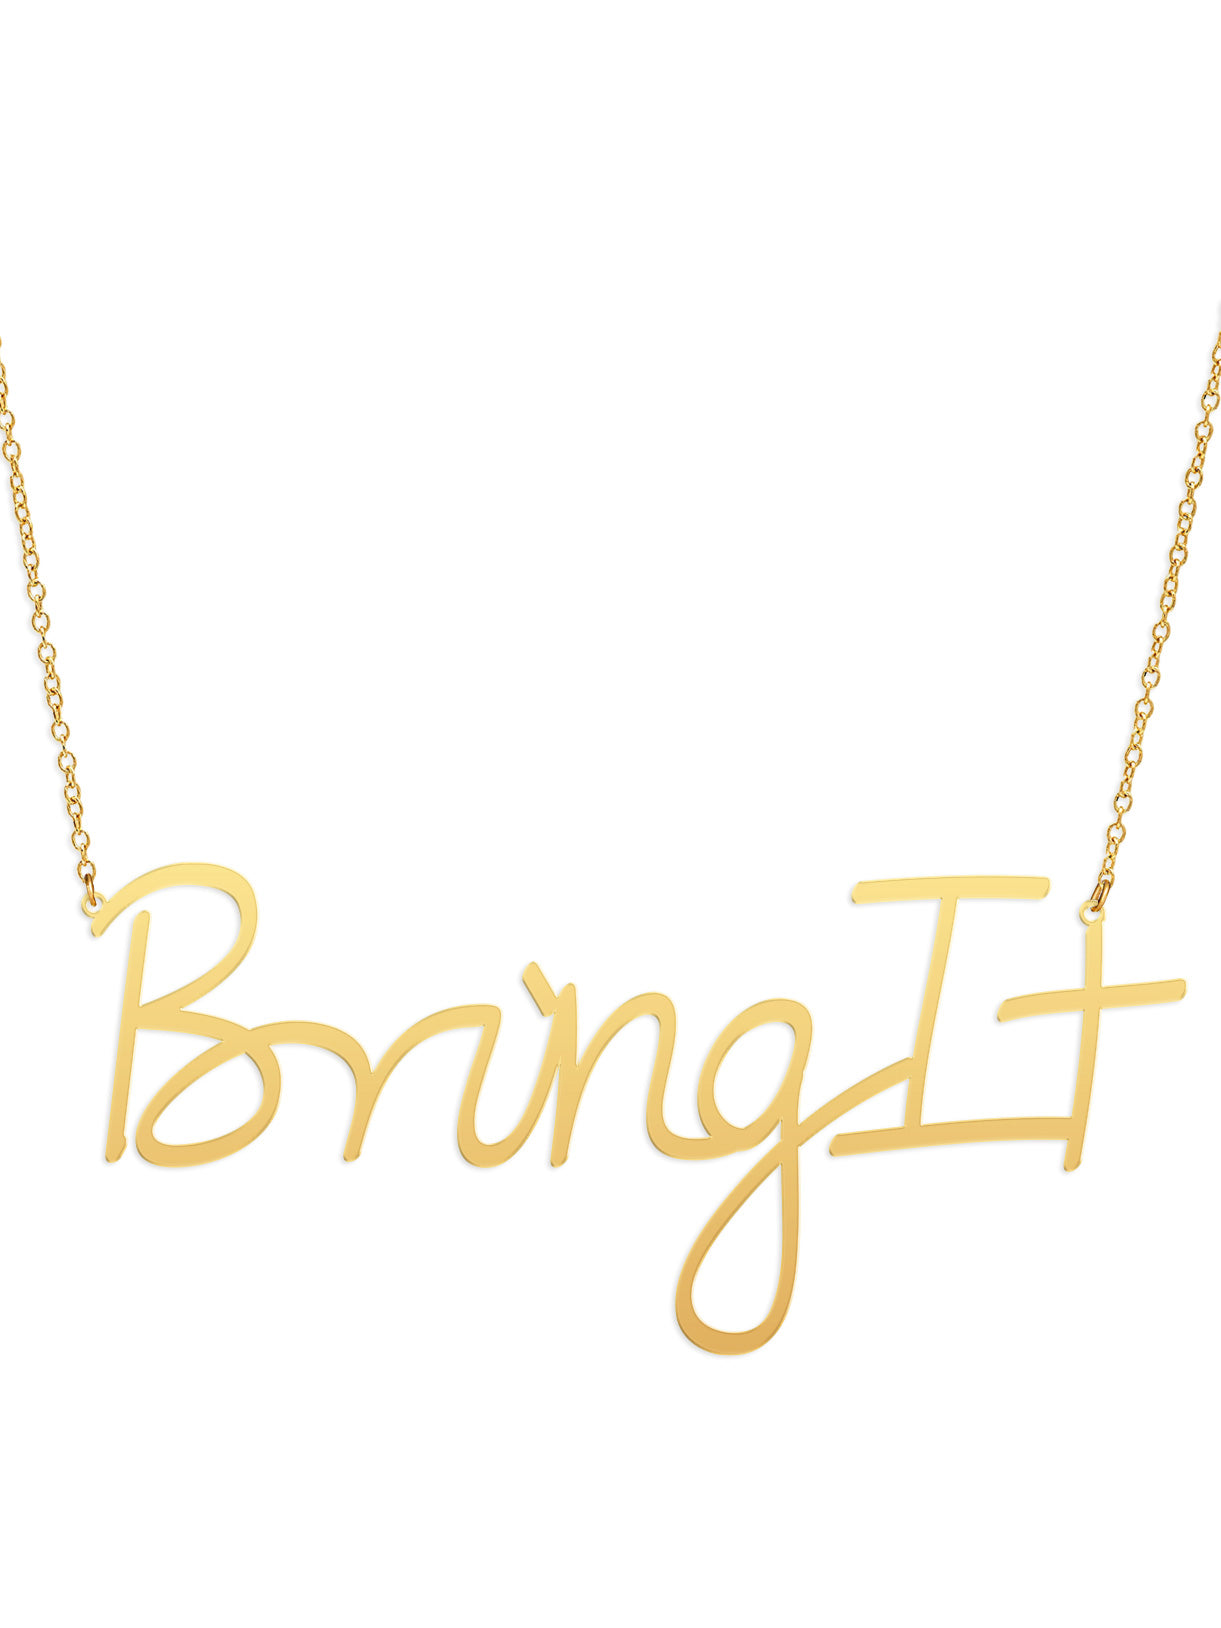 Bring It Necklace - High Quality, Affordable, Hand Written, Empowering, Self Love, Mantra Word Necklace - Available in Gold and Silver - Small and Large Sizes - Made in USA - Brevity Jewelry